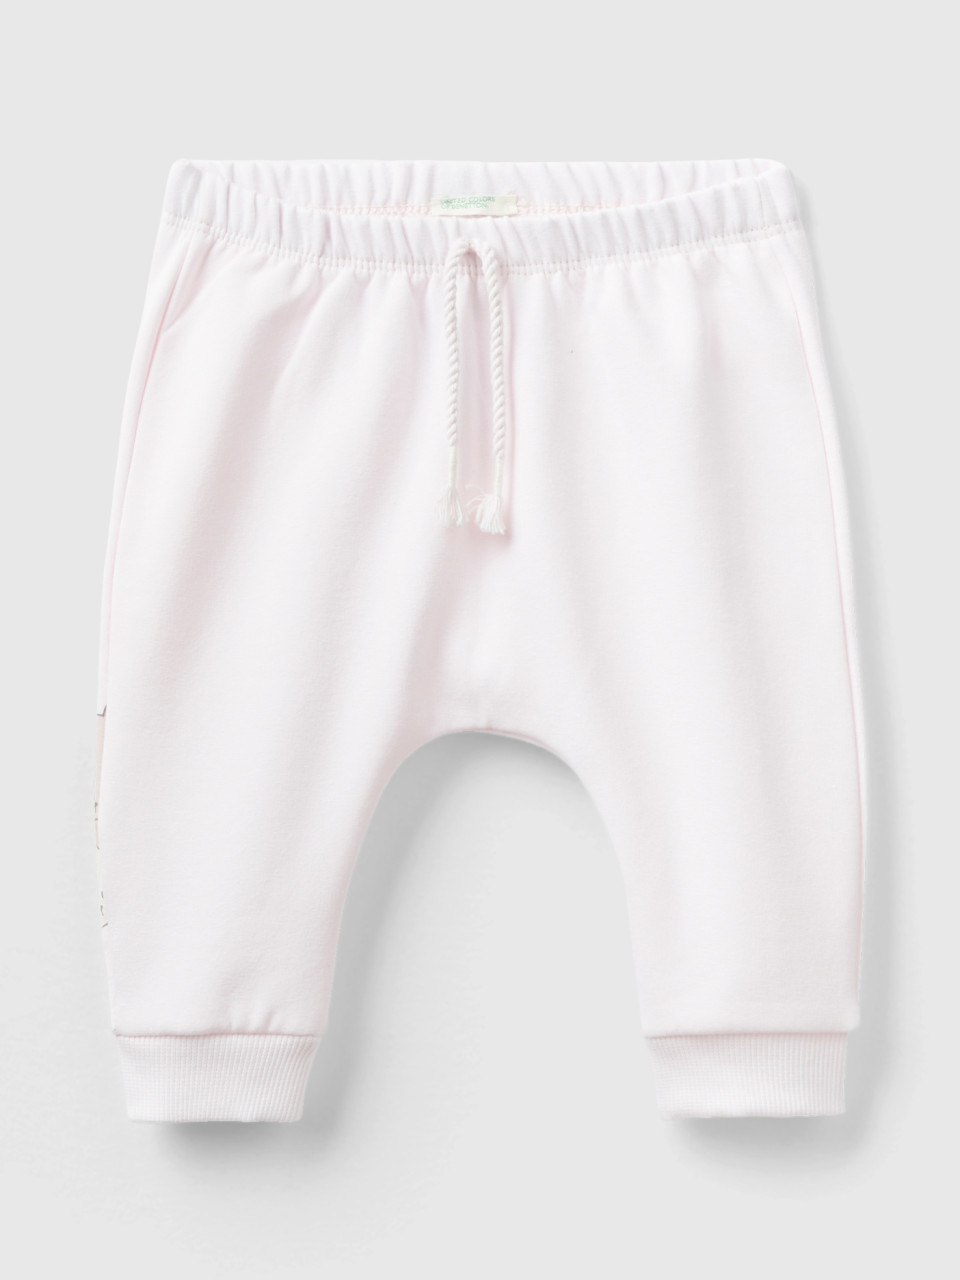 Benetton, Warm Sweat Trousers With Pocket, Soft Pink, Kids